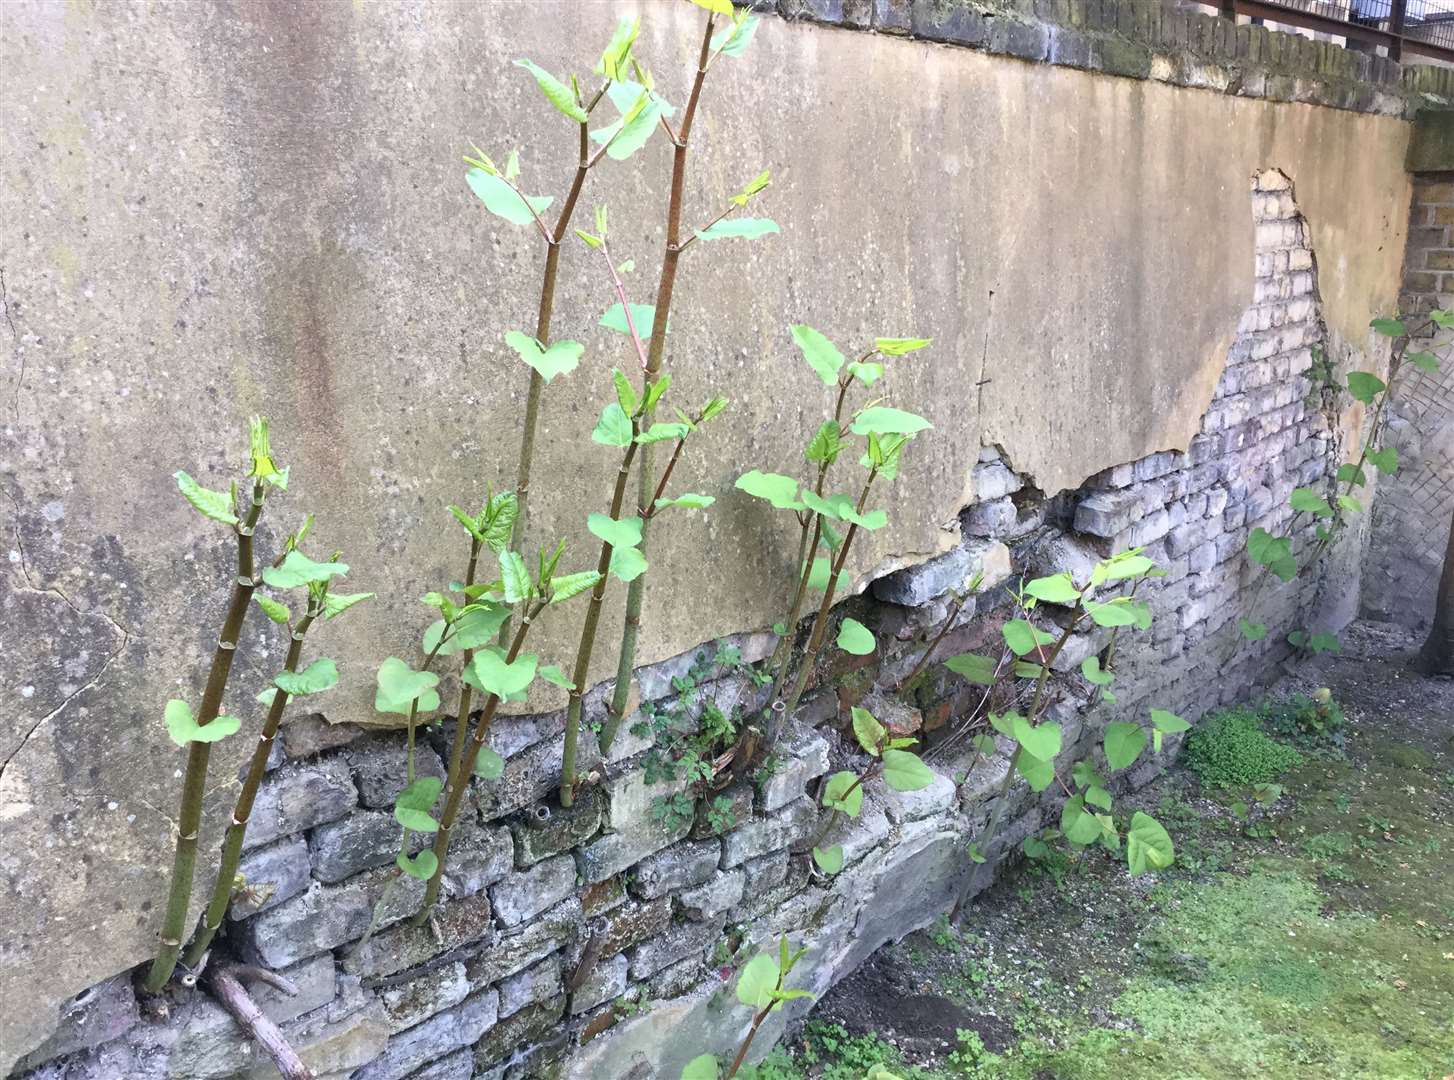 Japanese knotweed can quickly damage walls